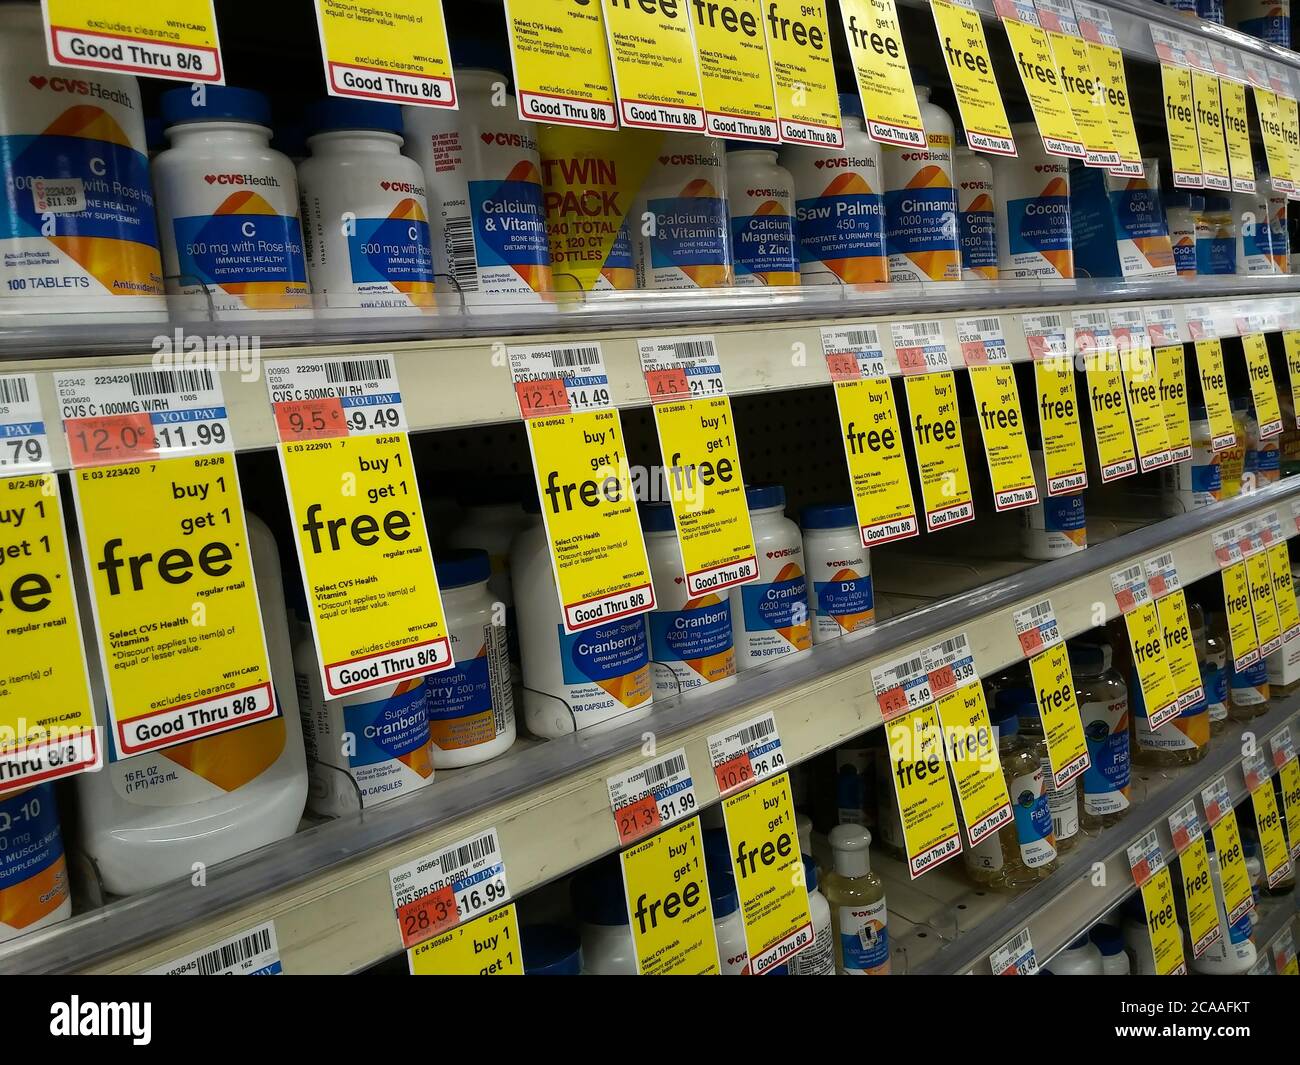 https://c8.alamy.com/comp/2CAAFKT/a-selection-of-vitamins-on-the-shelves-of-a-cvs-health-drugstore-in-new-york-during-a-bogo-sale-on-sunday-august-2-2020-richard-b-levine-2CAAFKT.jpg